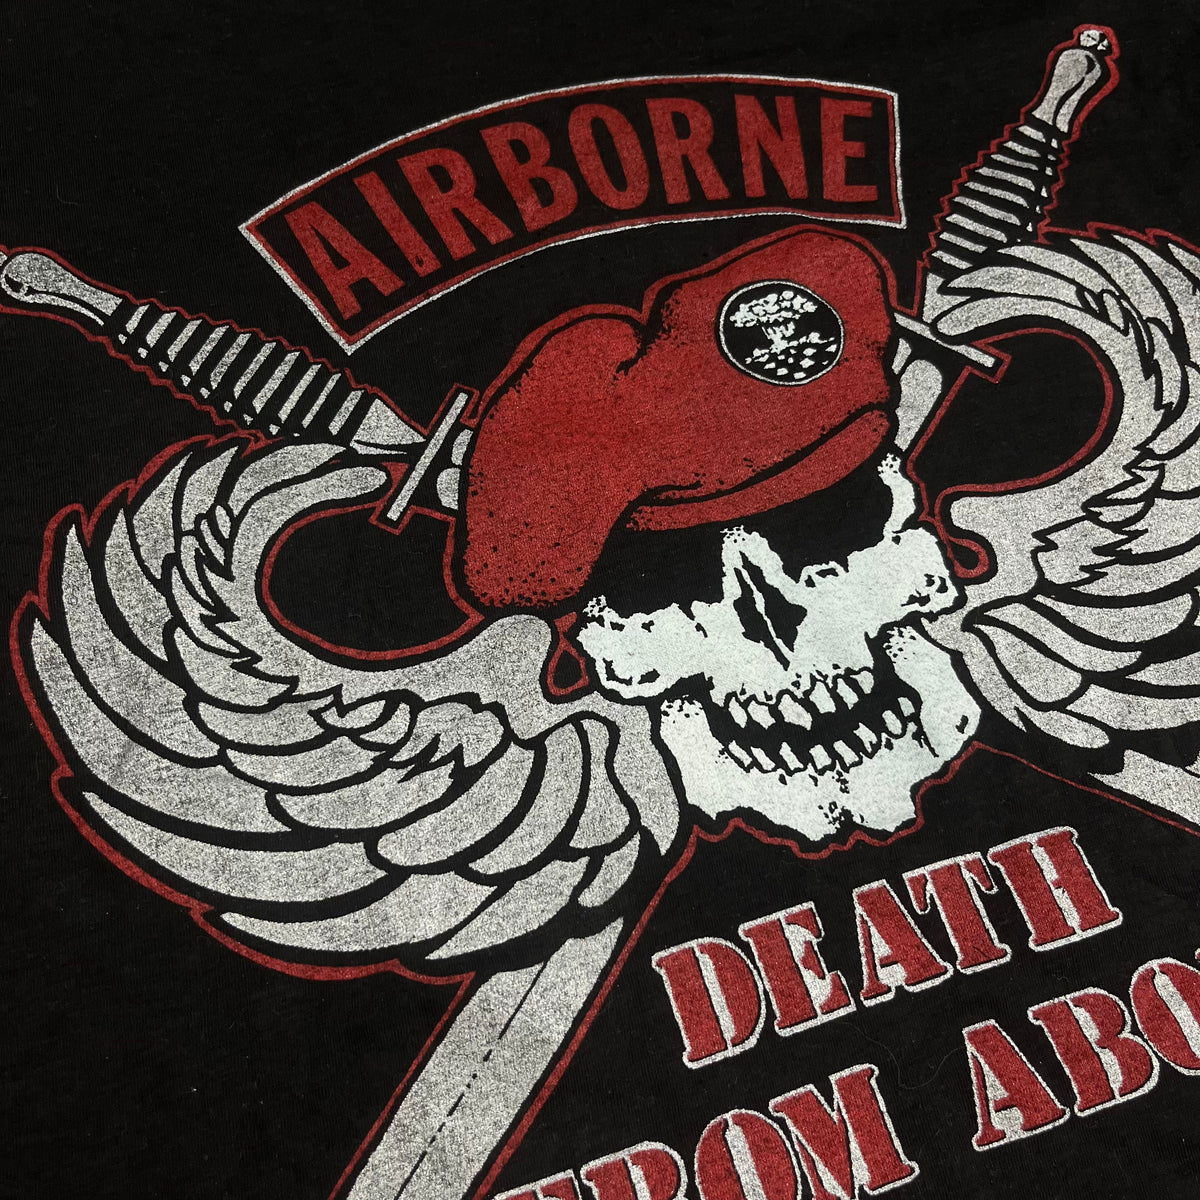 Vintage Airborne &quot;Death From Above&quot; T-Shirt